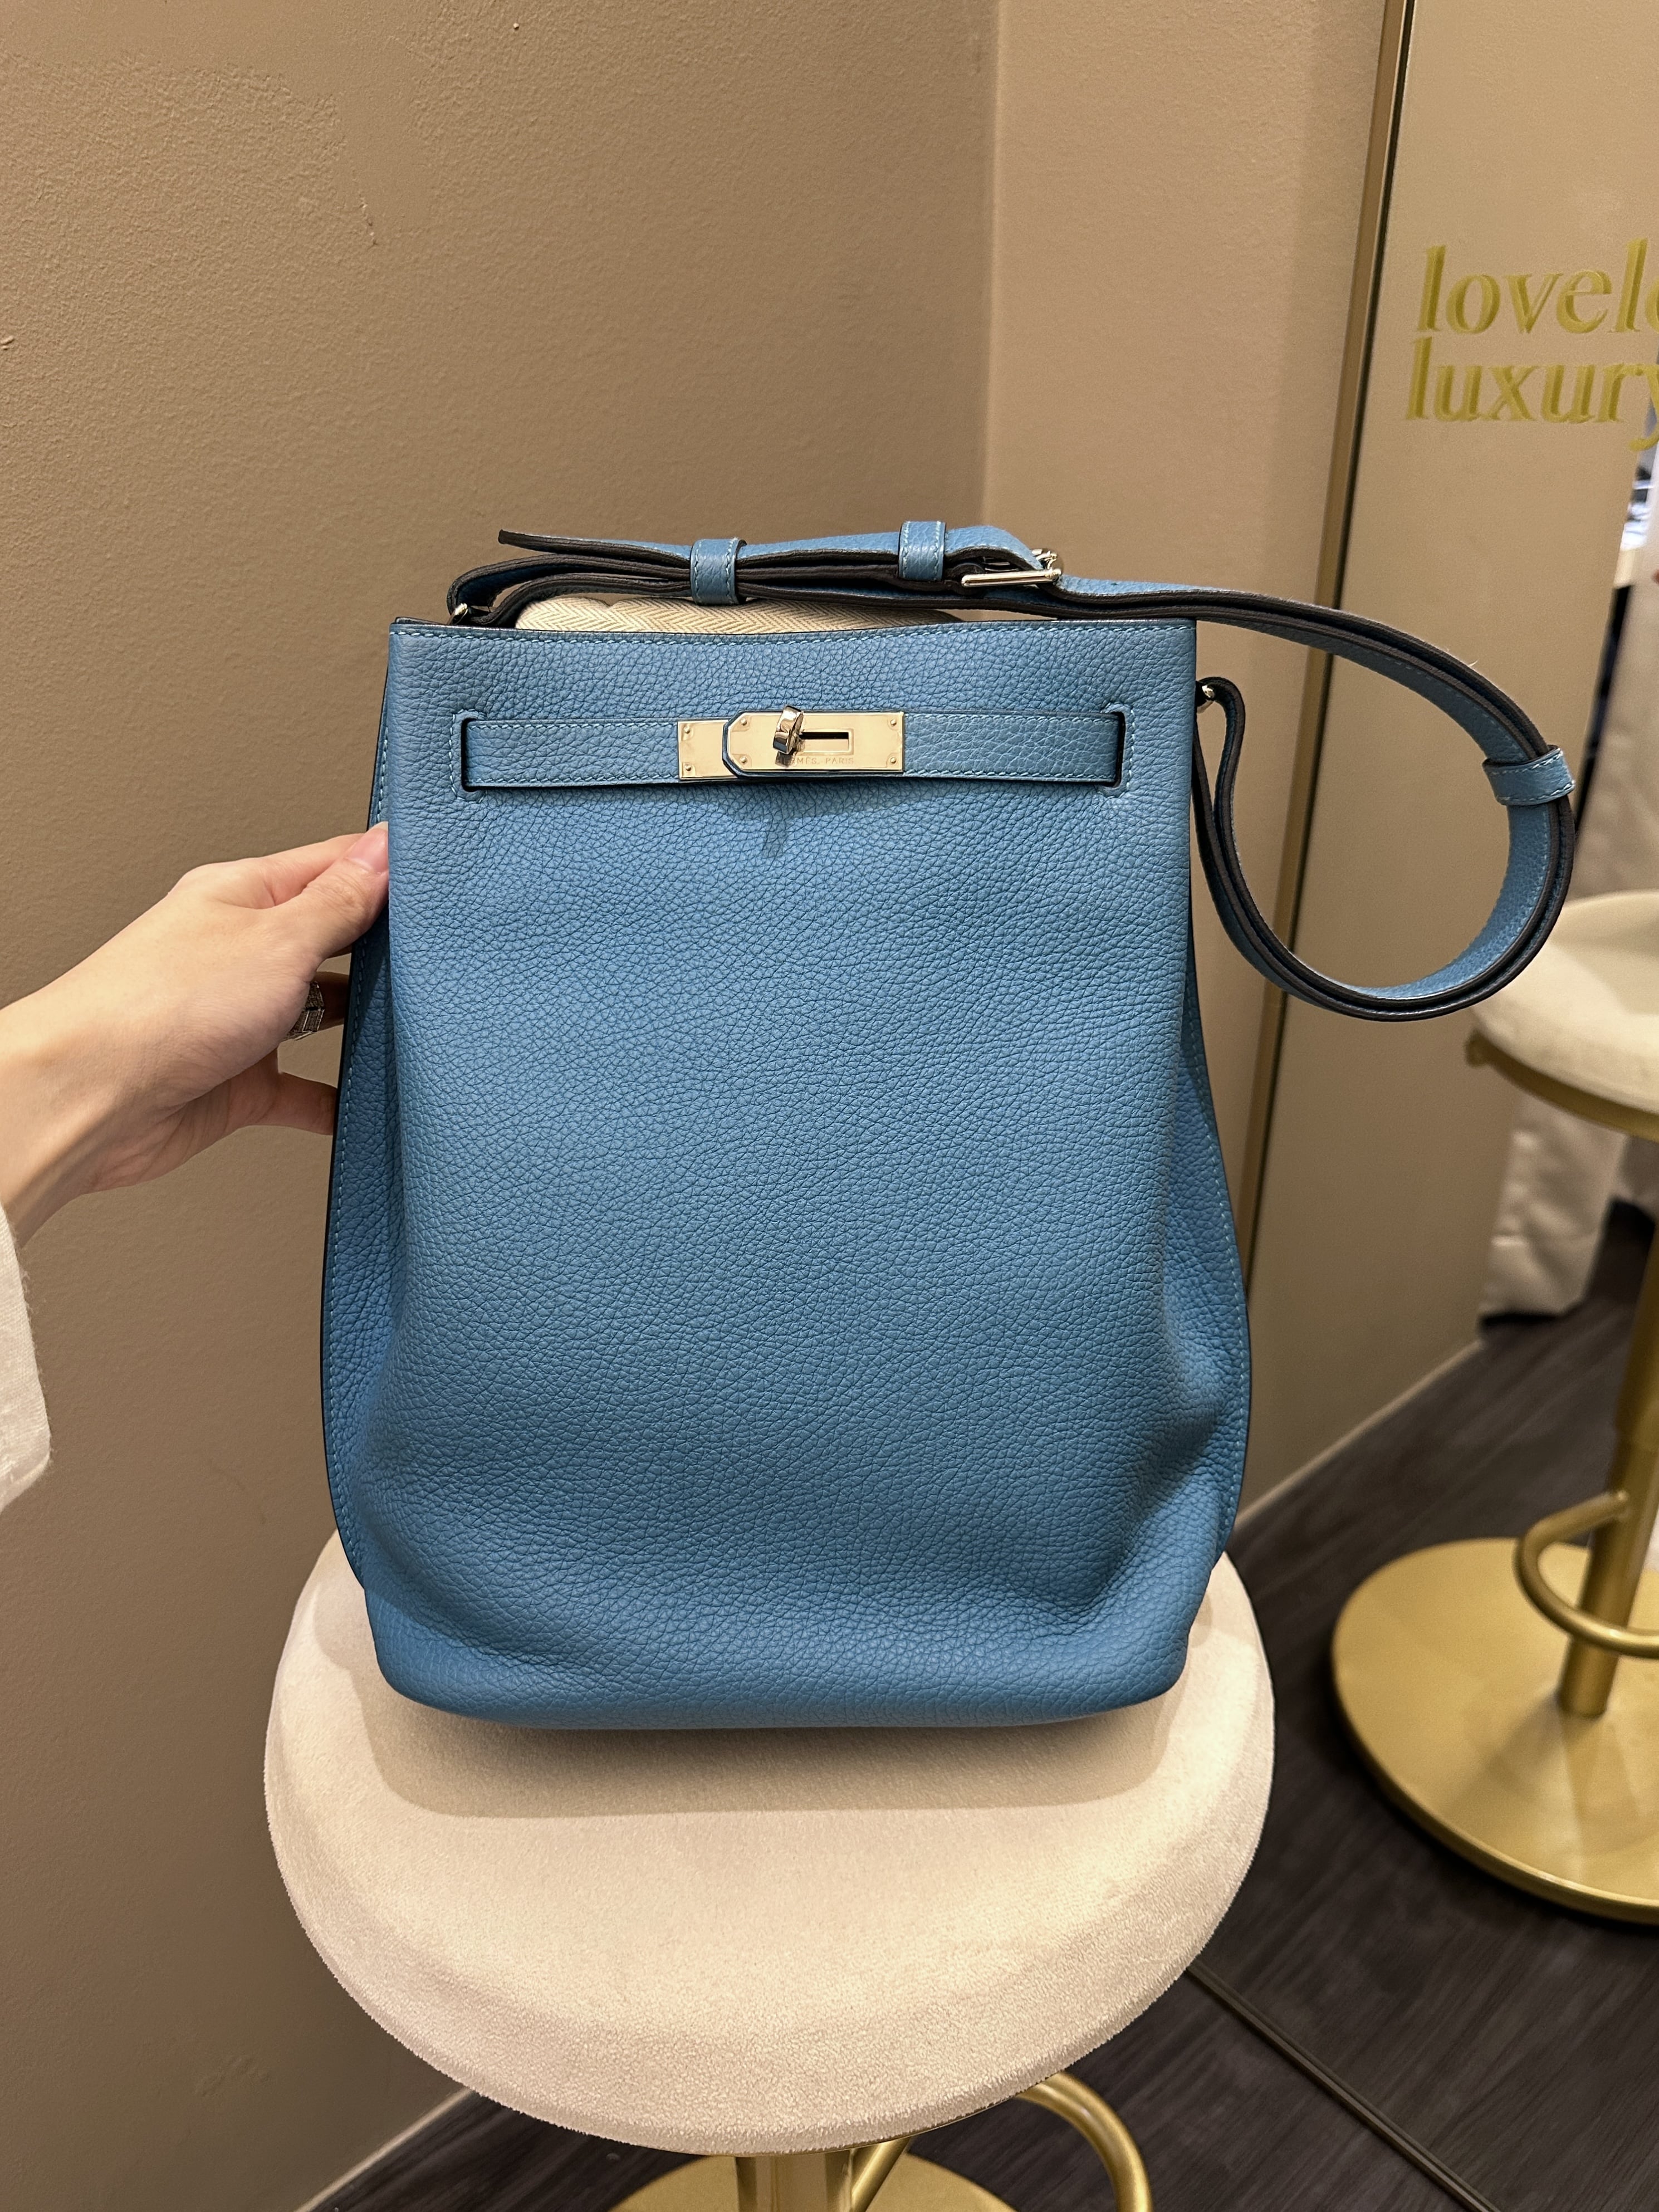 Hermes So Kelly 22 Turquoise Clemence – ＬＯＶＥＬＯＴＳＬＵＸＵＲＹ